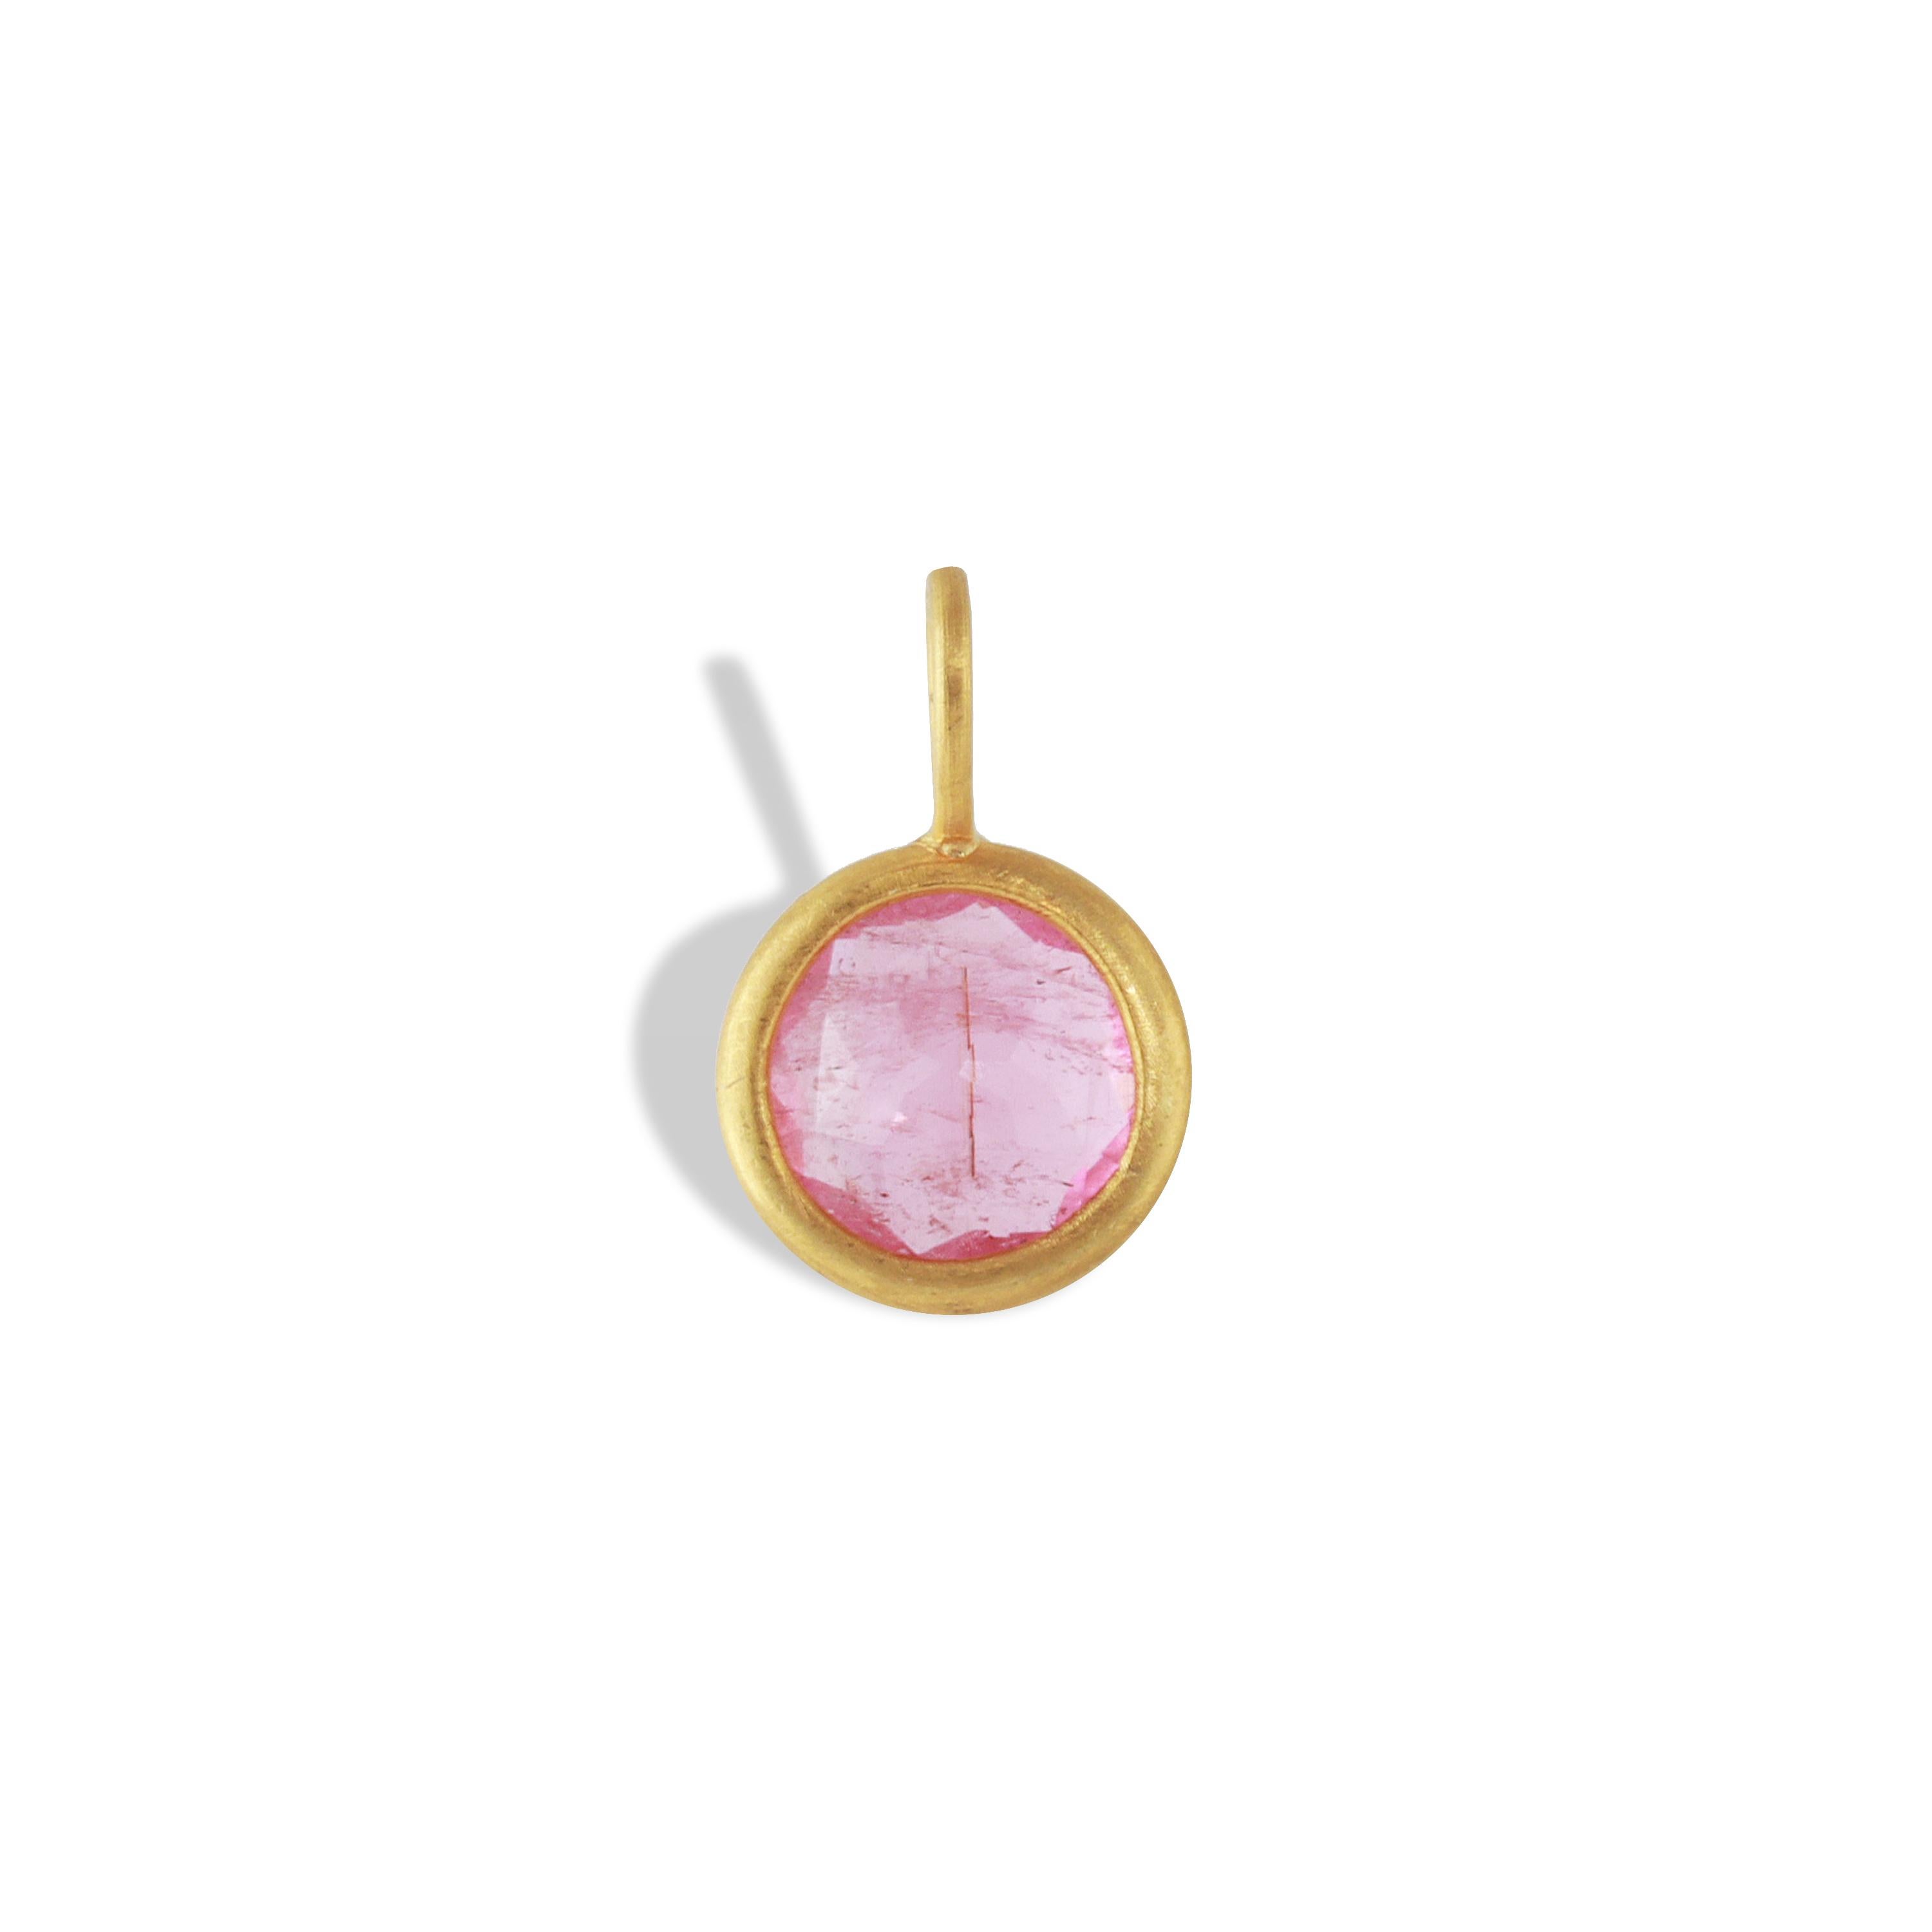 A 1.56 carat bright Pink tourmaline pendant set in 22k gold.  Simple and beautiful.

Wearing Pink Tourmaline throughout the day helps release stress, worries, depression and anxiety.  Like most heart based stones, the vibration of pink tourmaline